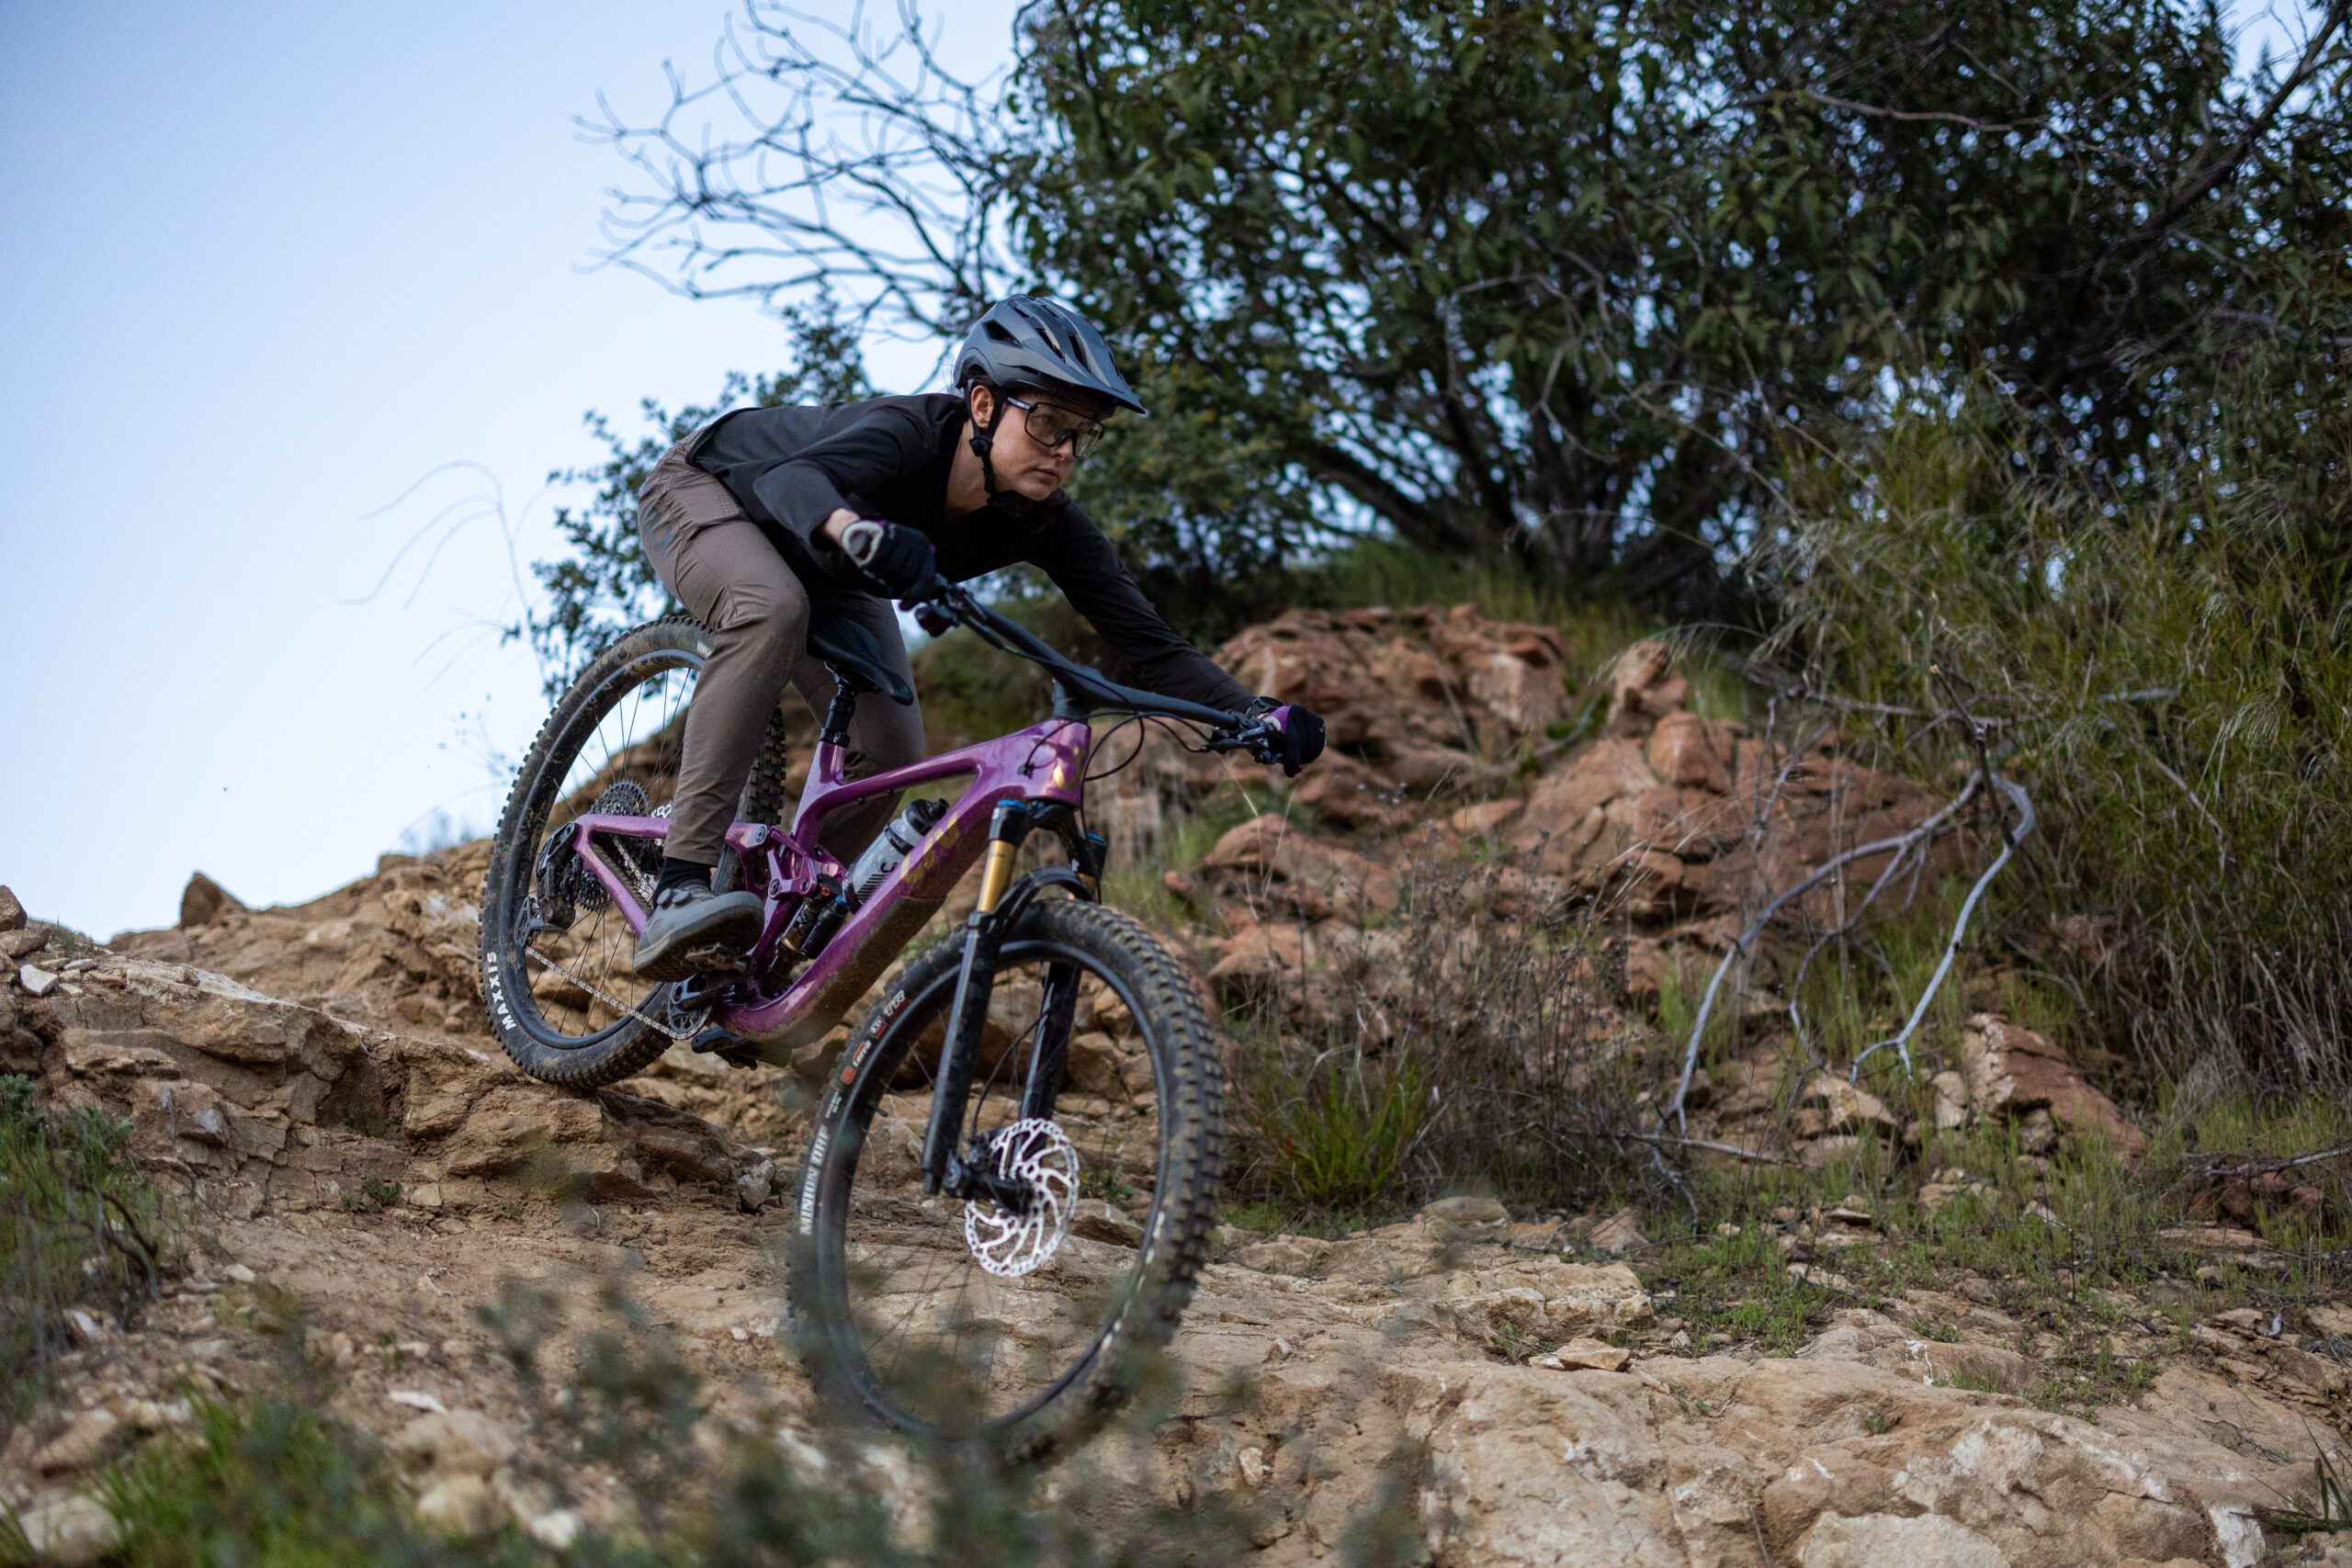 LIV Launches New Intrigue X Mid-Travel Trail Bike With Flip Chip Headset and Geo Customization